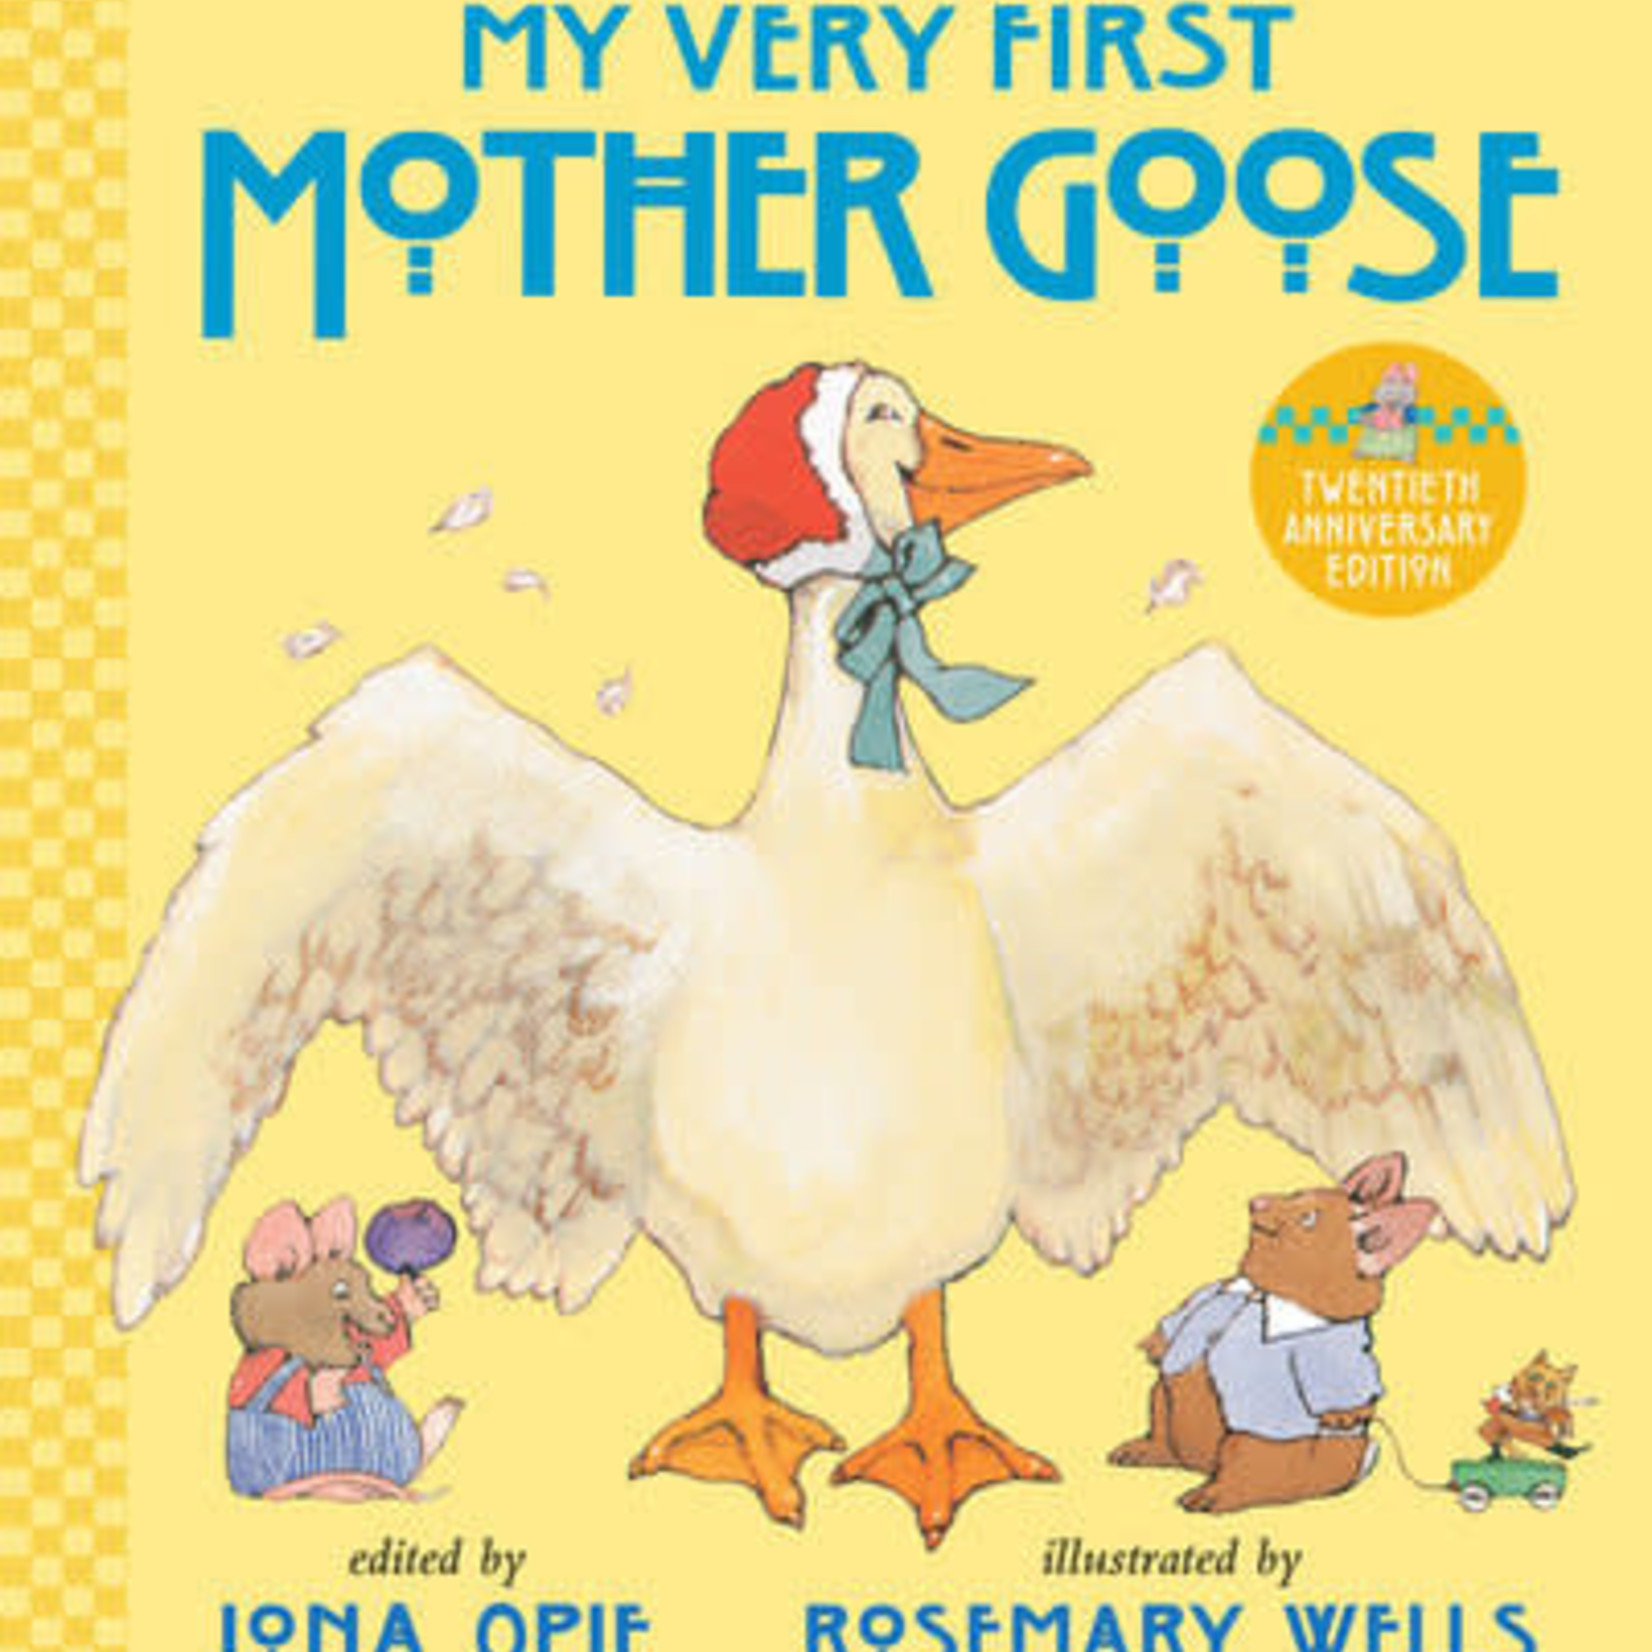 Penguin Random House (here) Mother Goose - My Very First